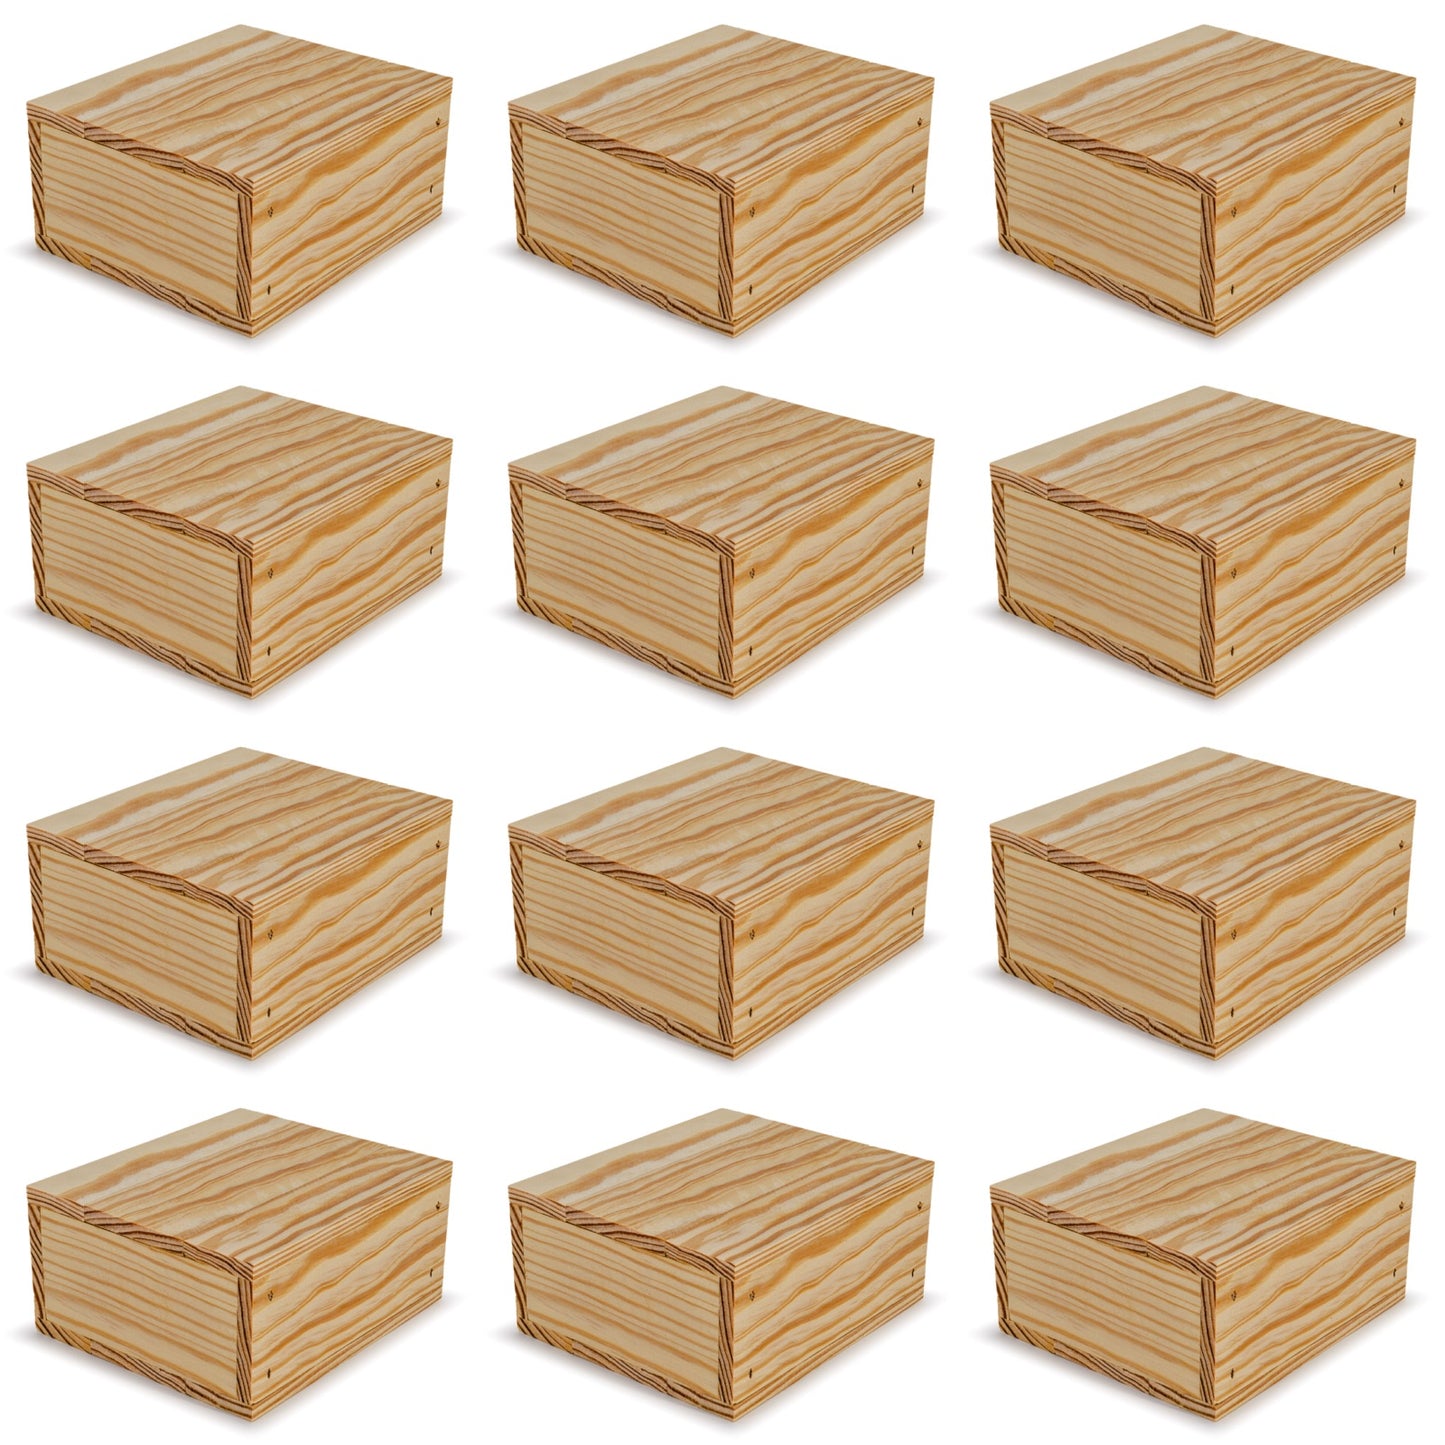 12 Small wooden crates with lid 6x5.5x2.75